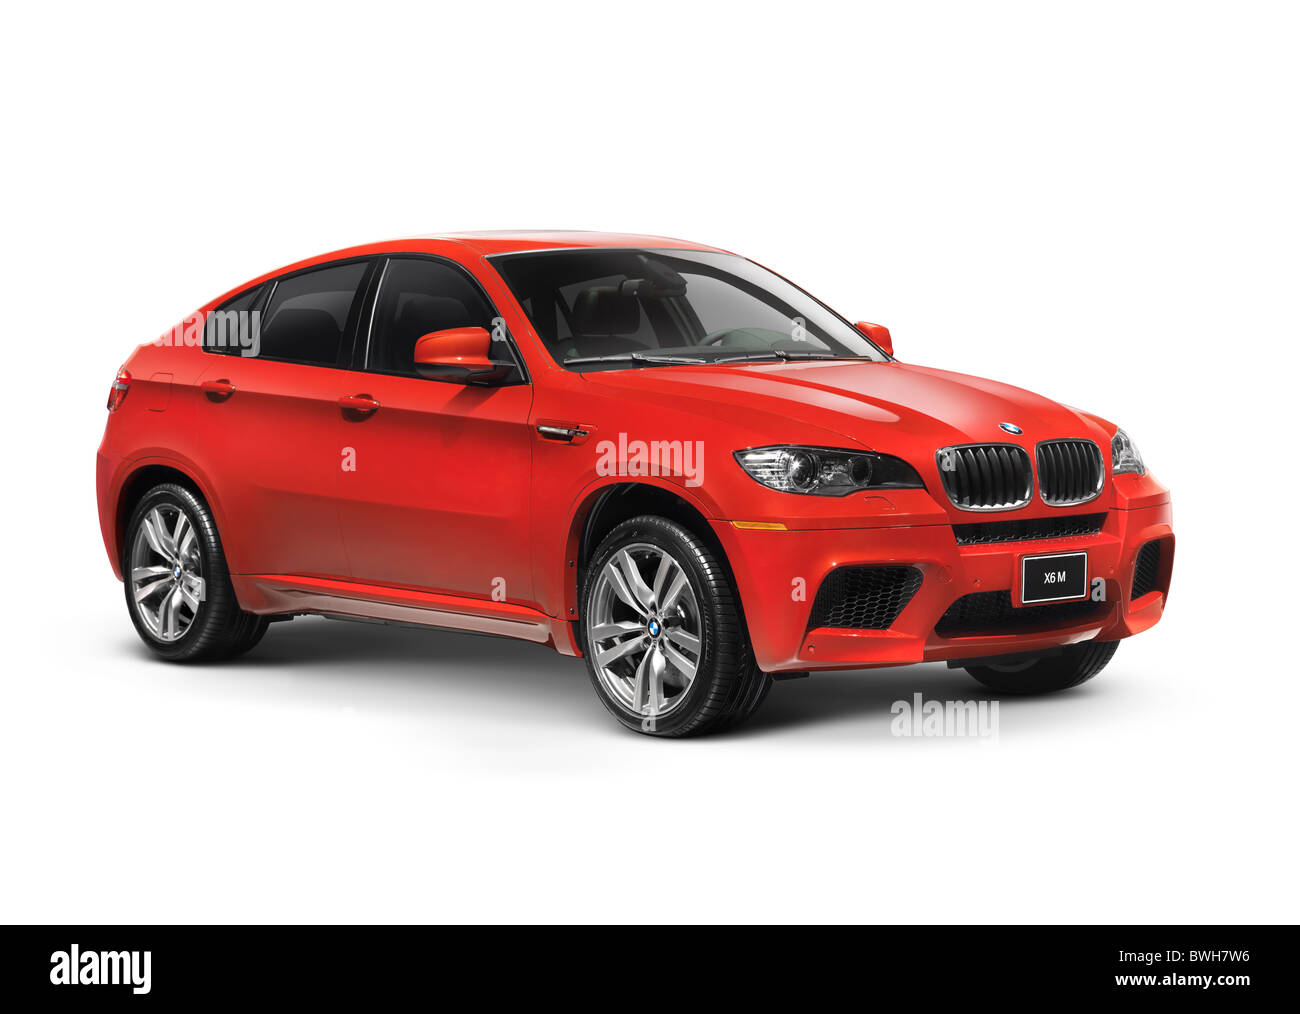 License available at MaximImages.com - Red 2011 BMW X6 M crossover. Isolated car on white background with clipping path. Stock Photo